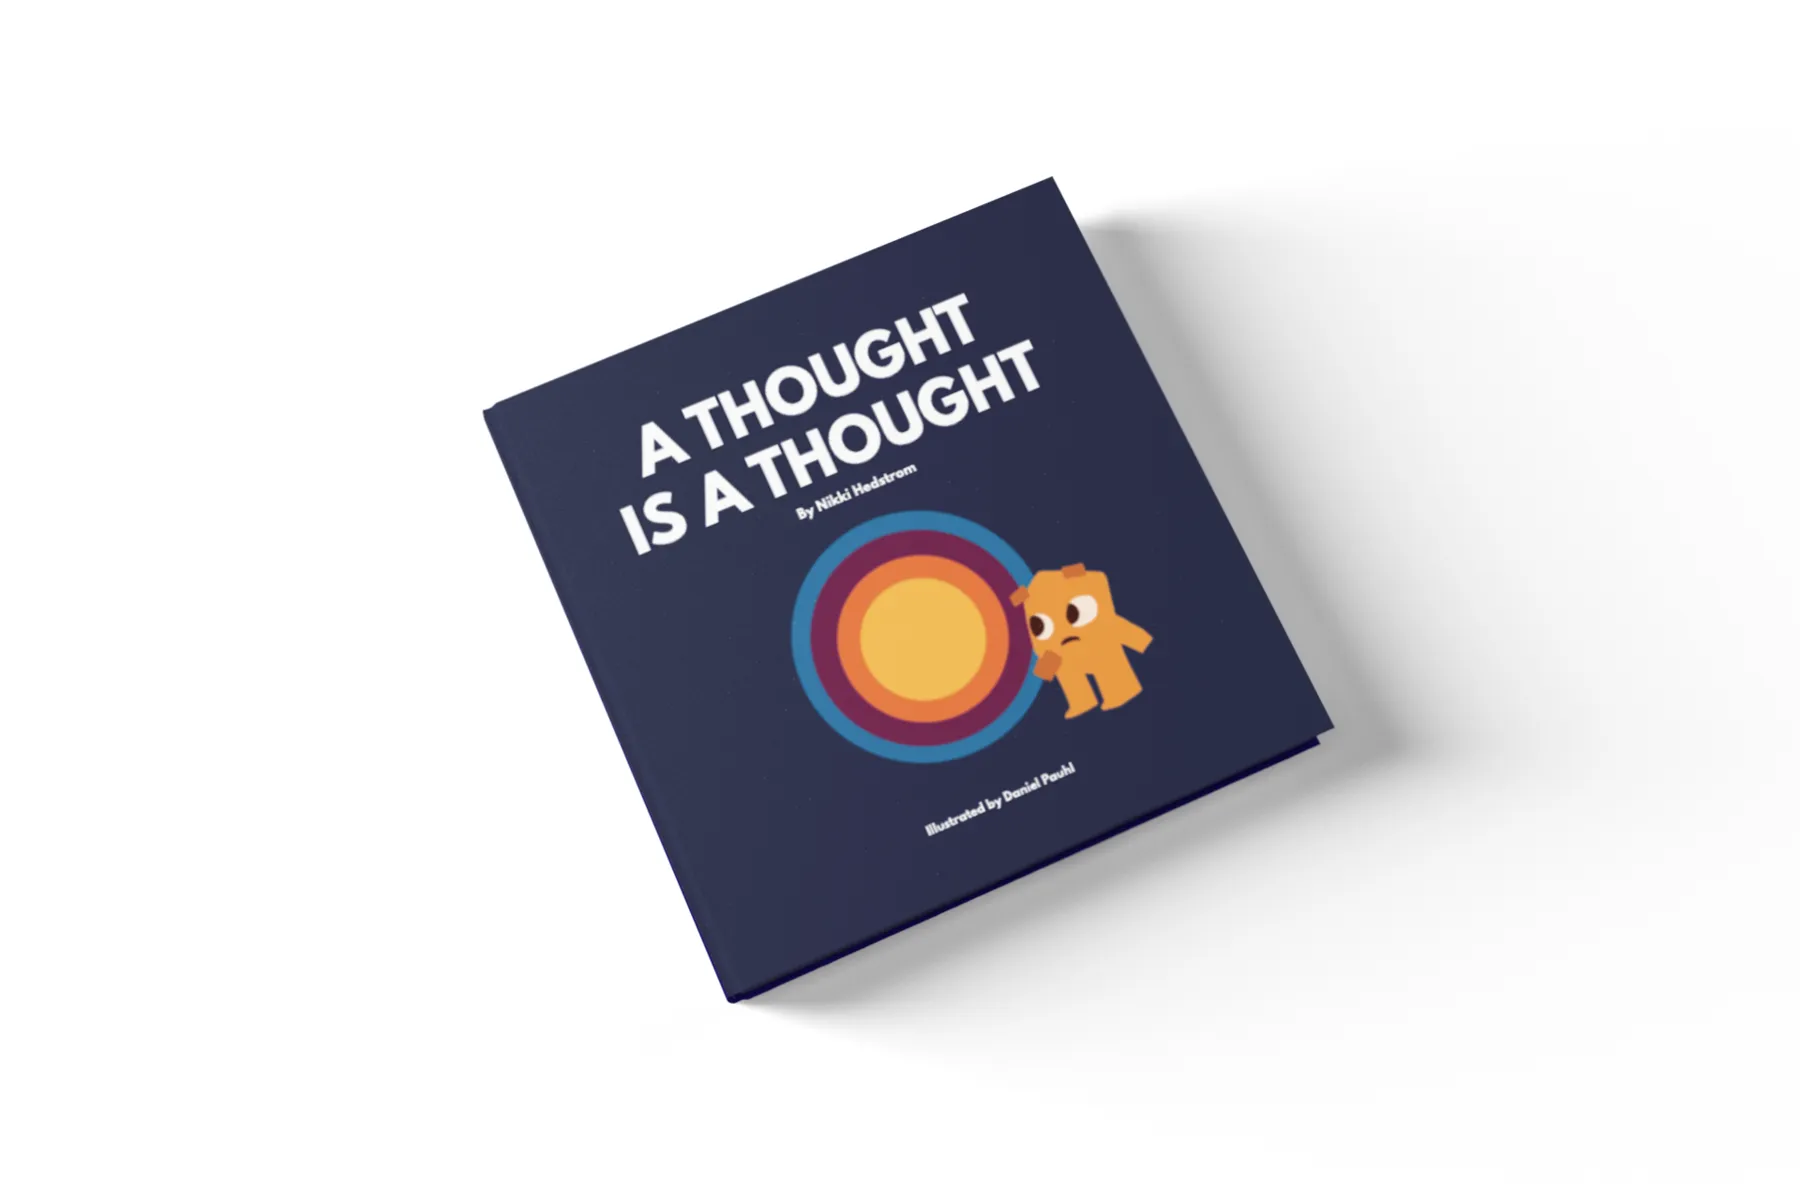 Hardcover "A Thought is a Thought"